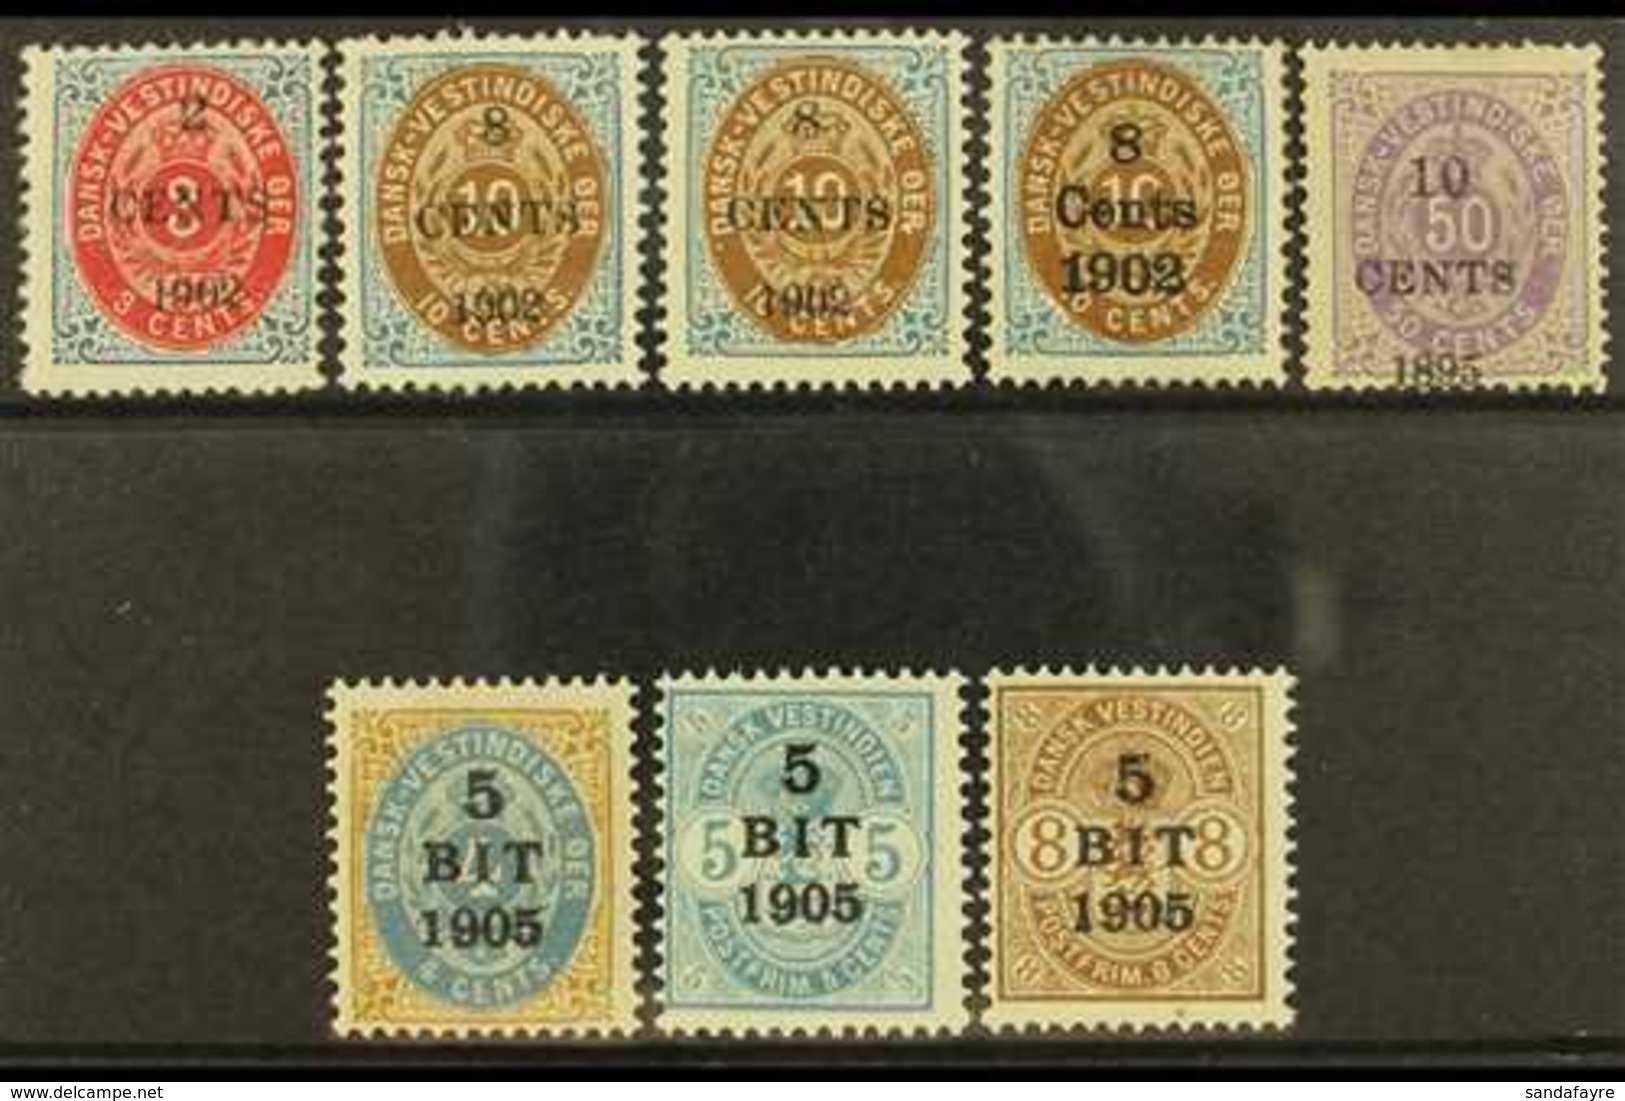 1902-05 SURCHARGES Mint Range With 2 CENTS 1902 On 3c Nhm, 8 CENTS On 10c Nhm, Another With White Spot On R's Foot (Faci - Danish West Indies